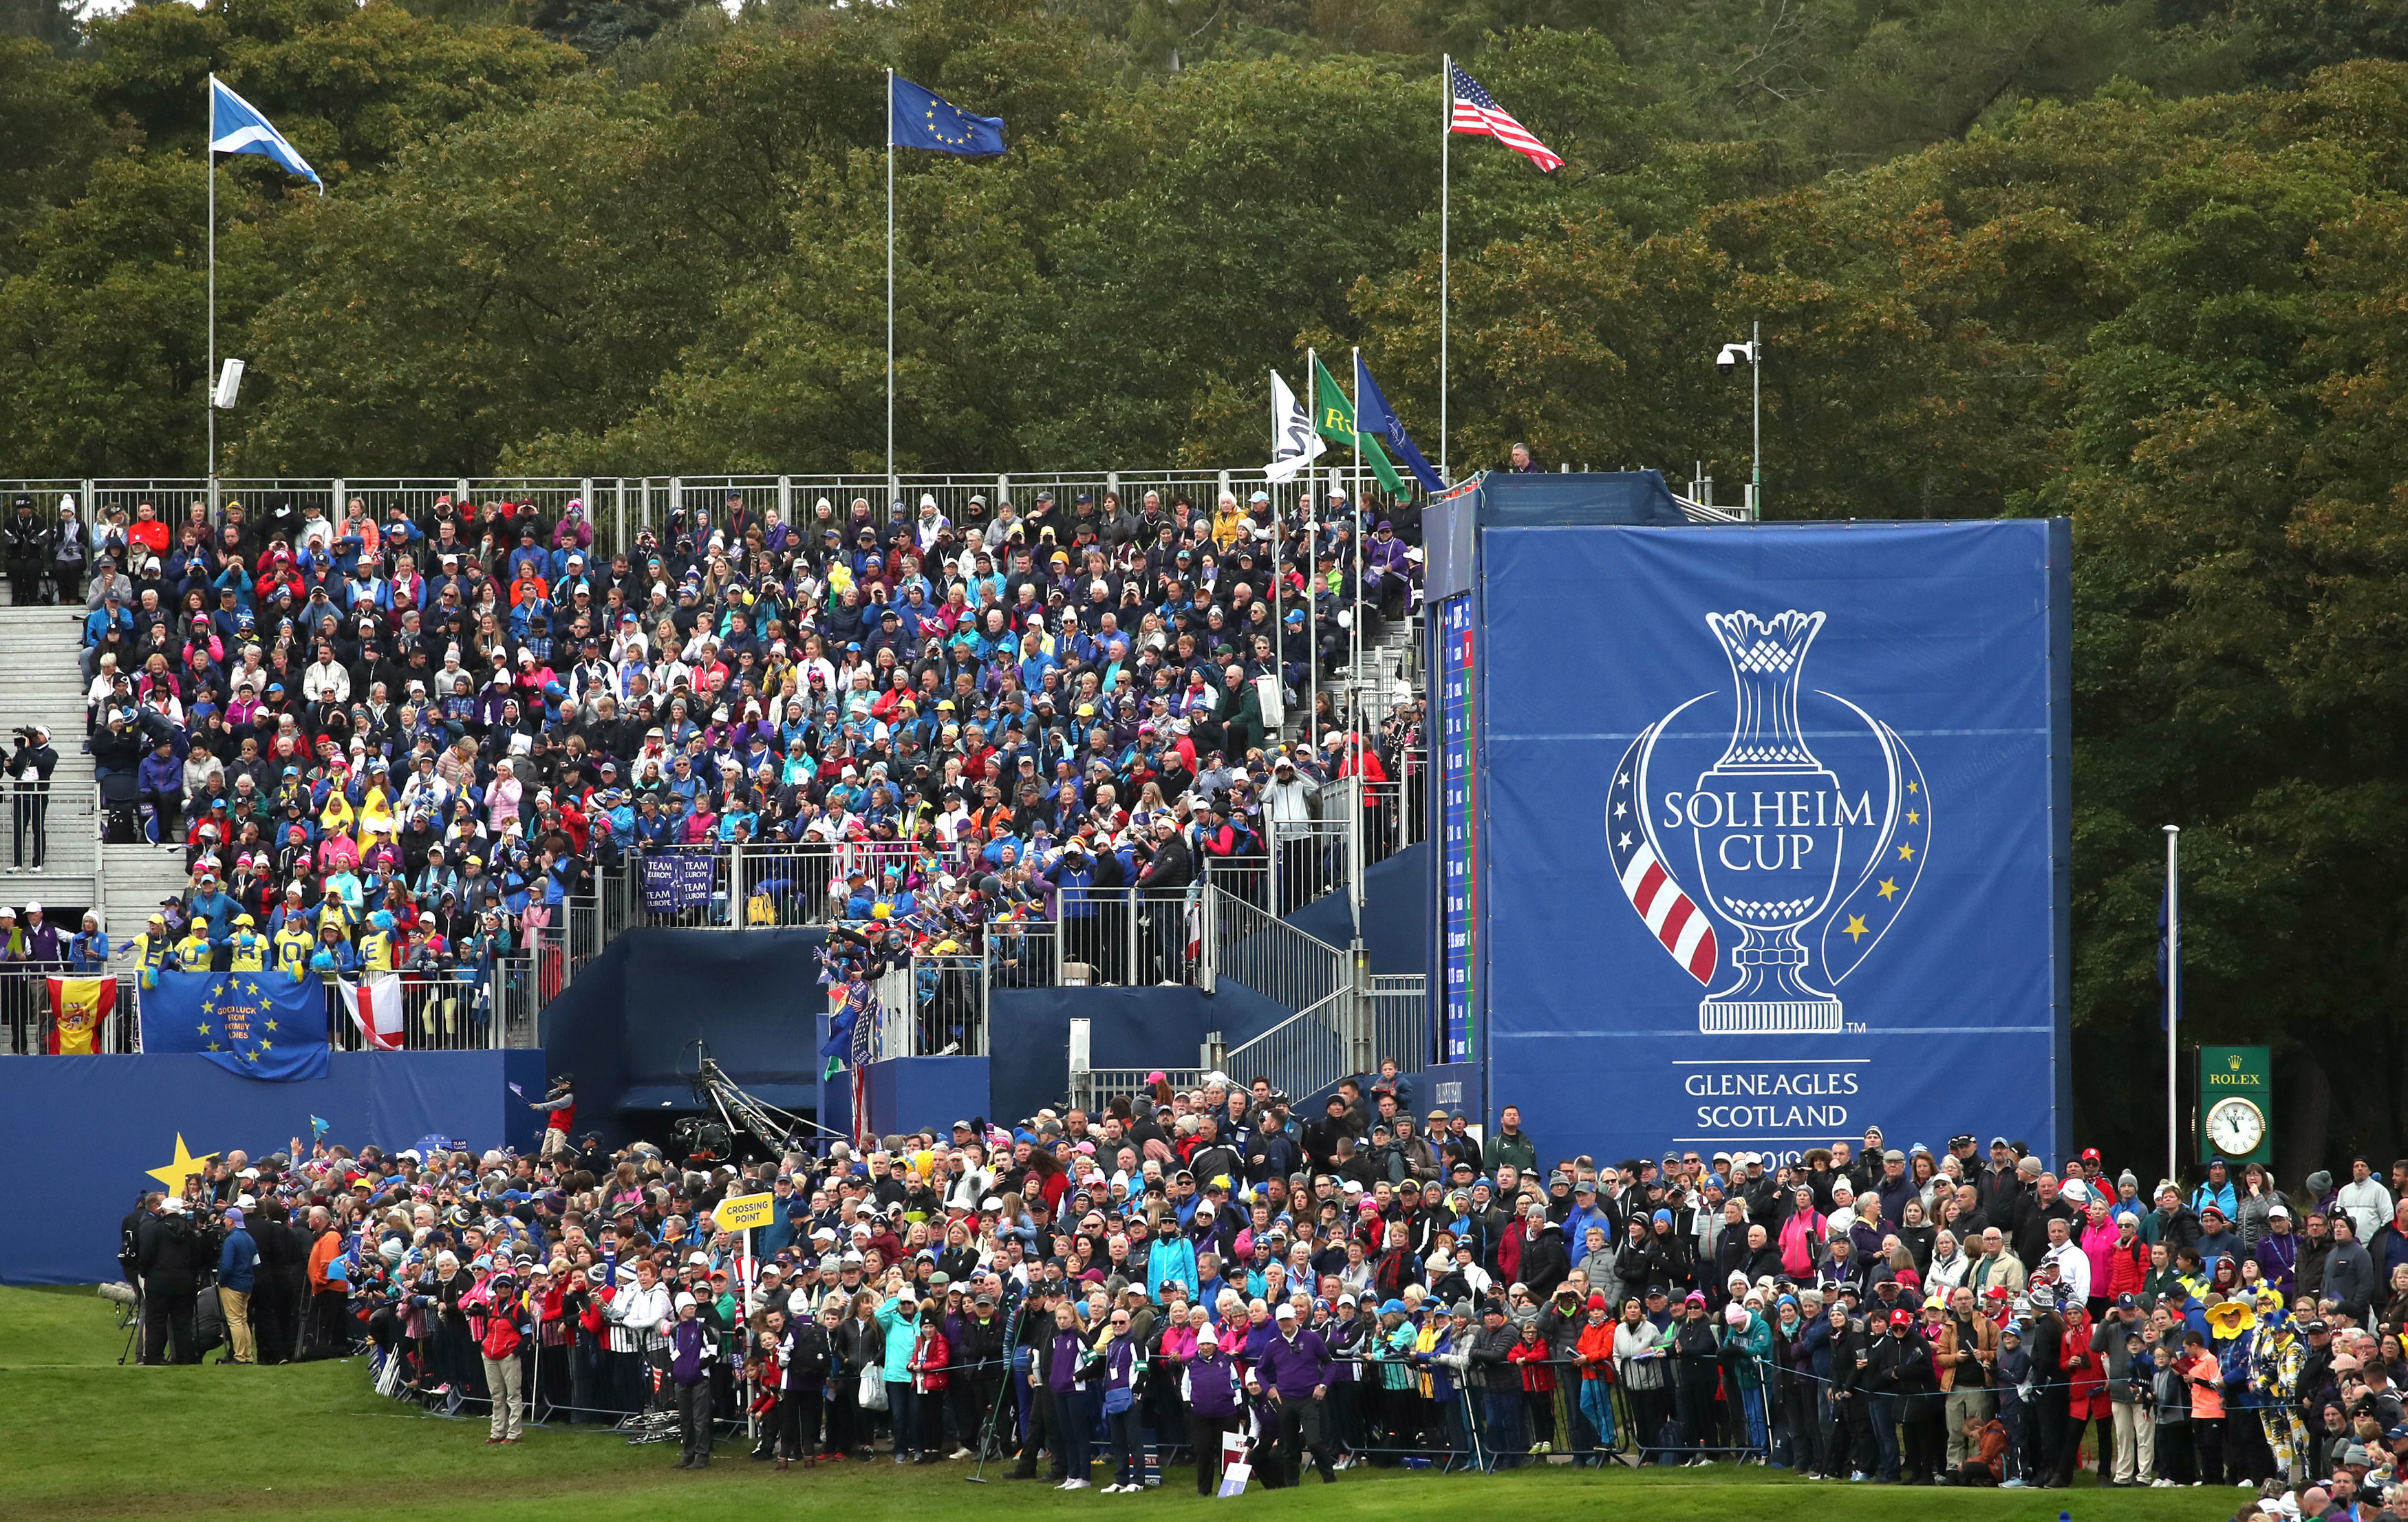 Fans watch the action on the 1st tee during the Singles match on day three of the 2019 Solheim Cup.